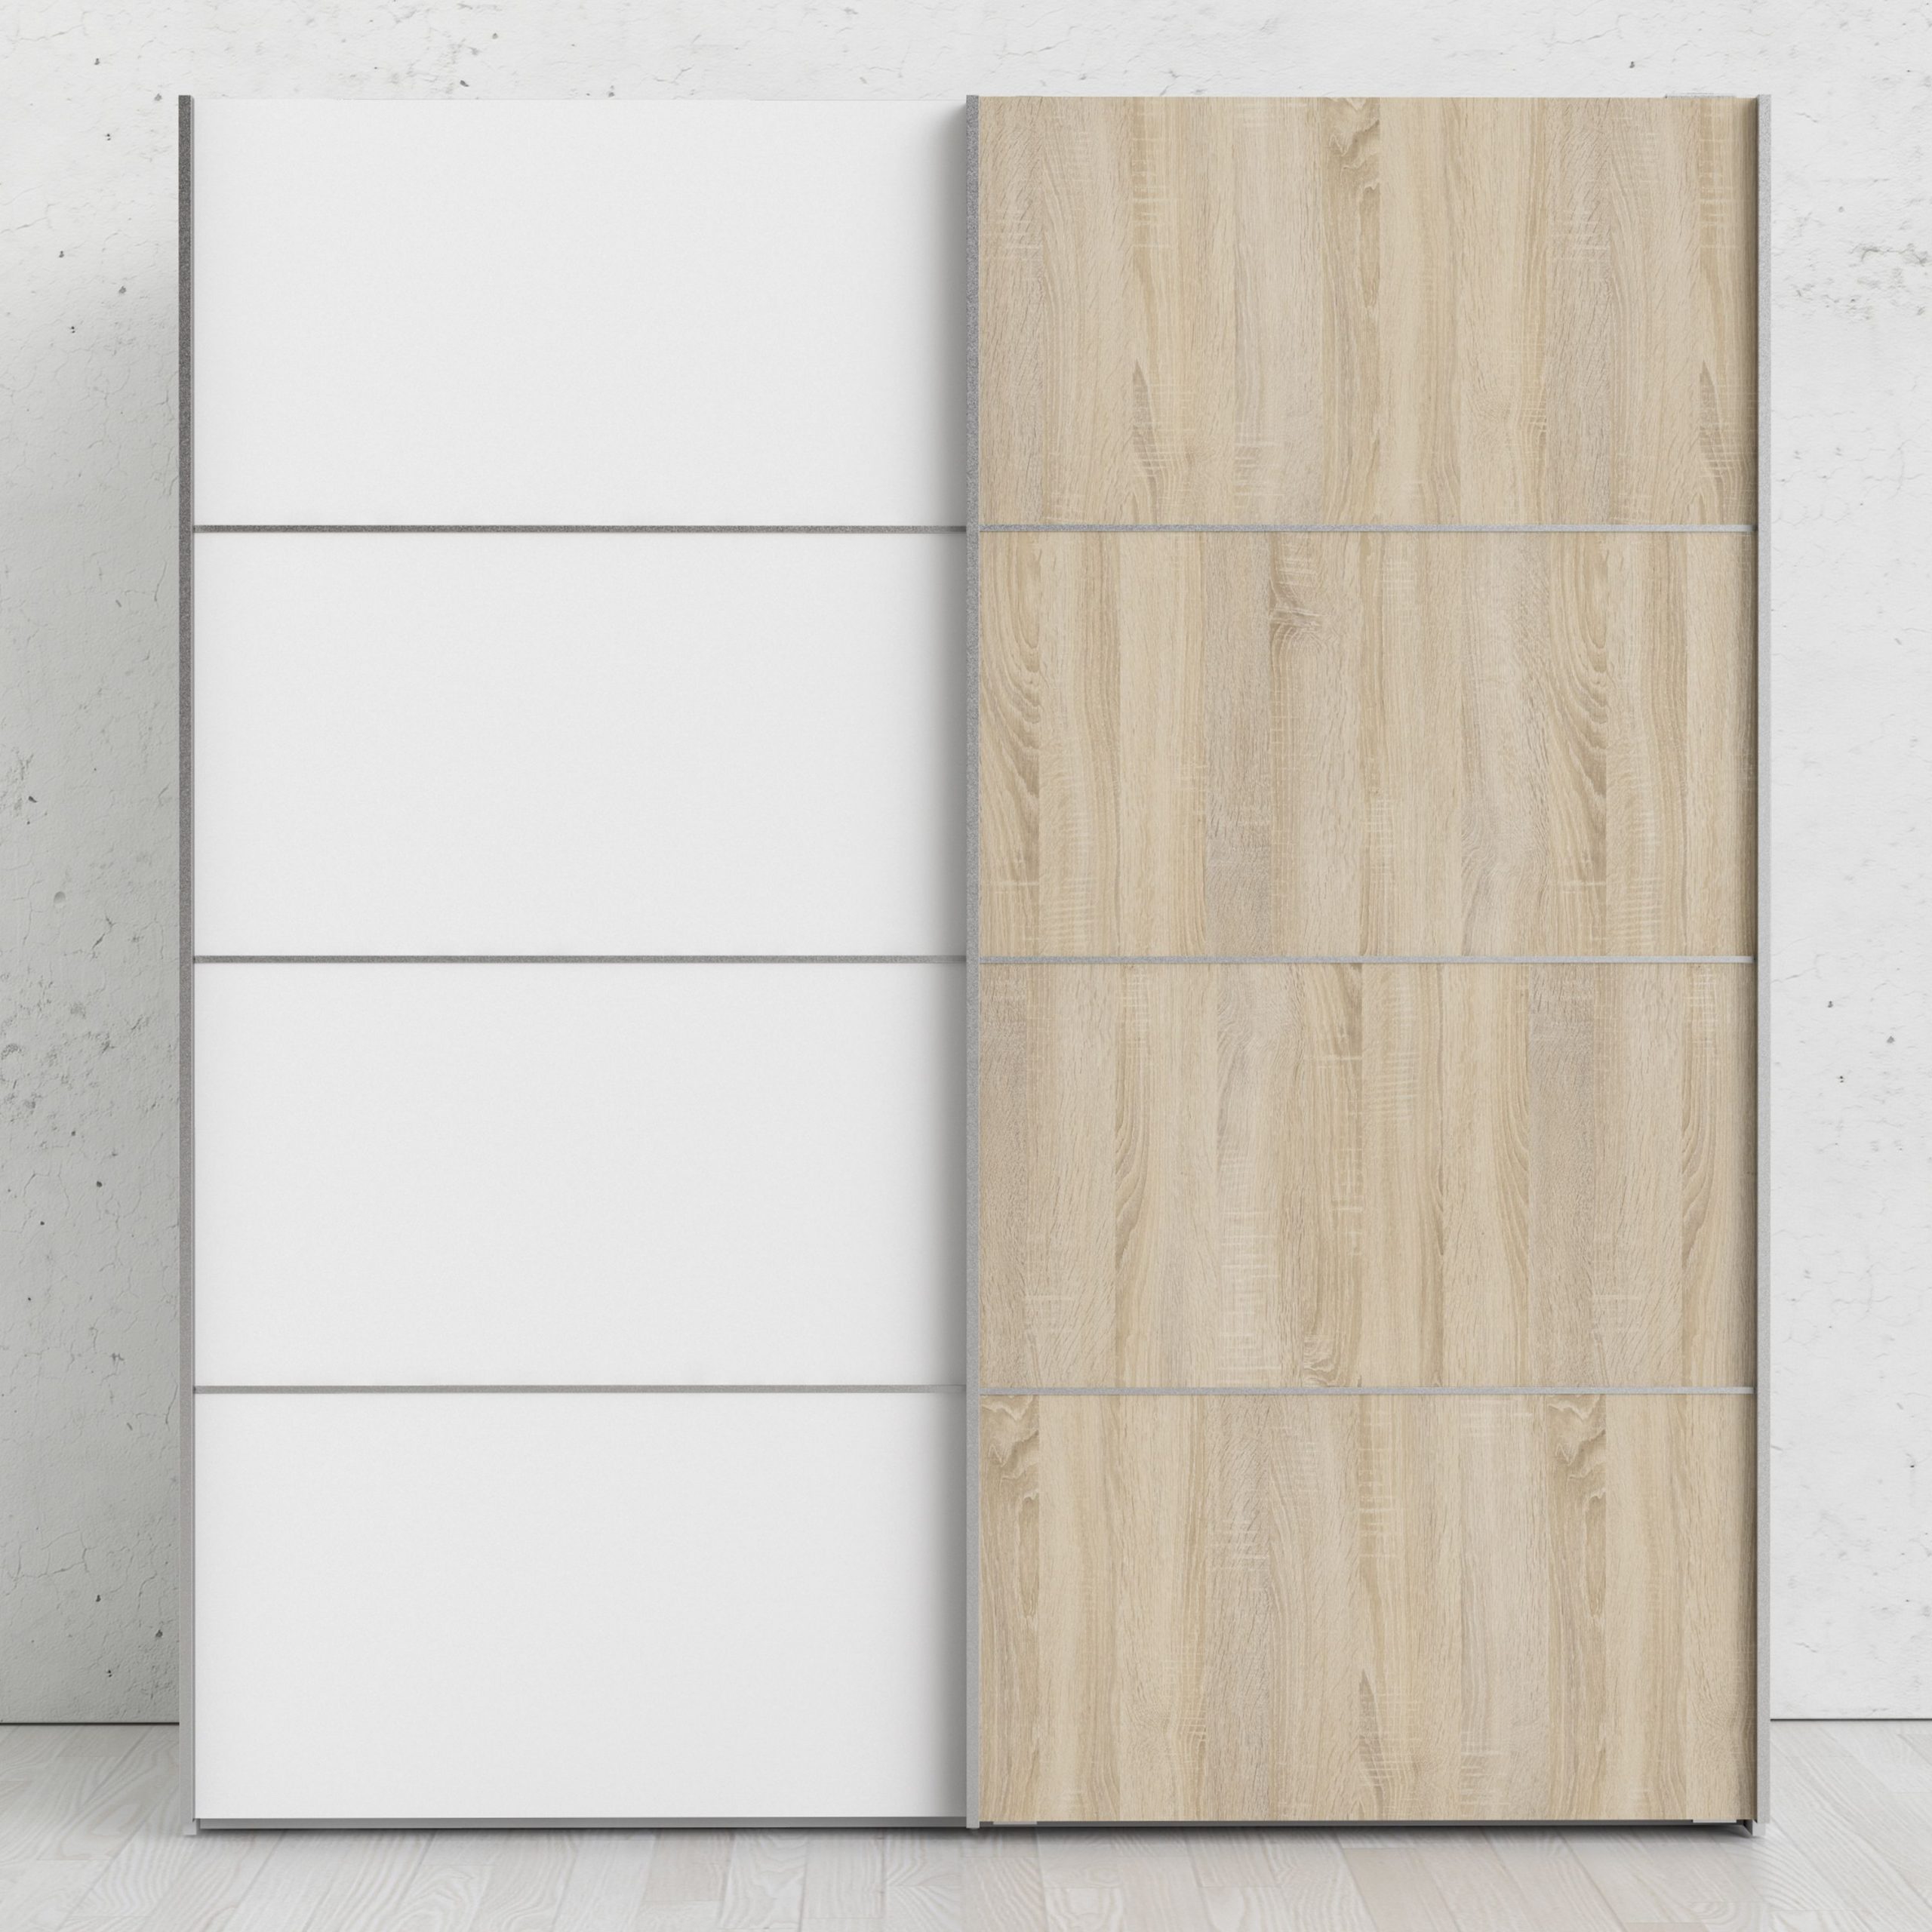 Verona Sliding Wardrobe 180cm In White With White And Oak Doors With 5 Shelves